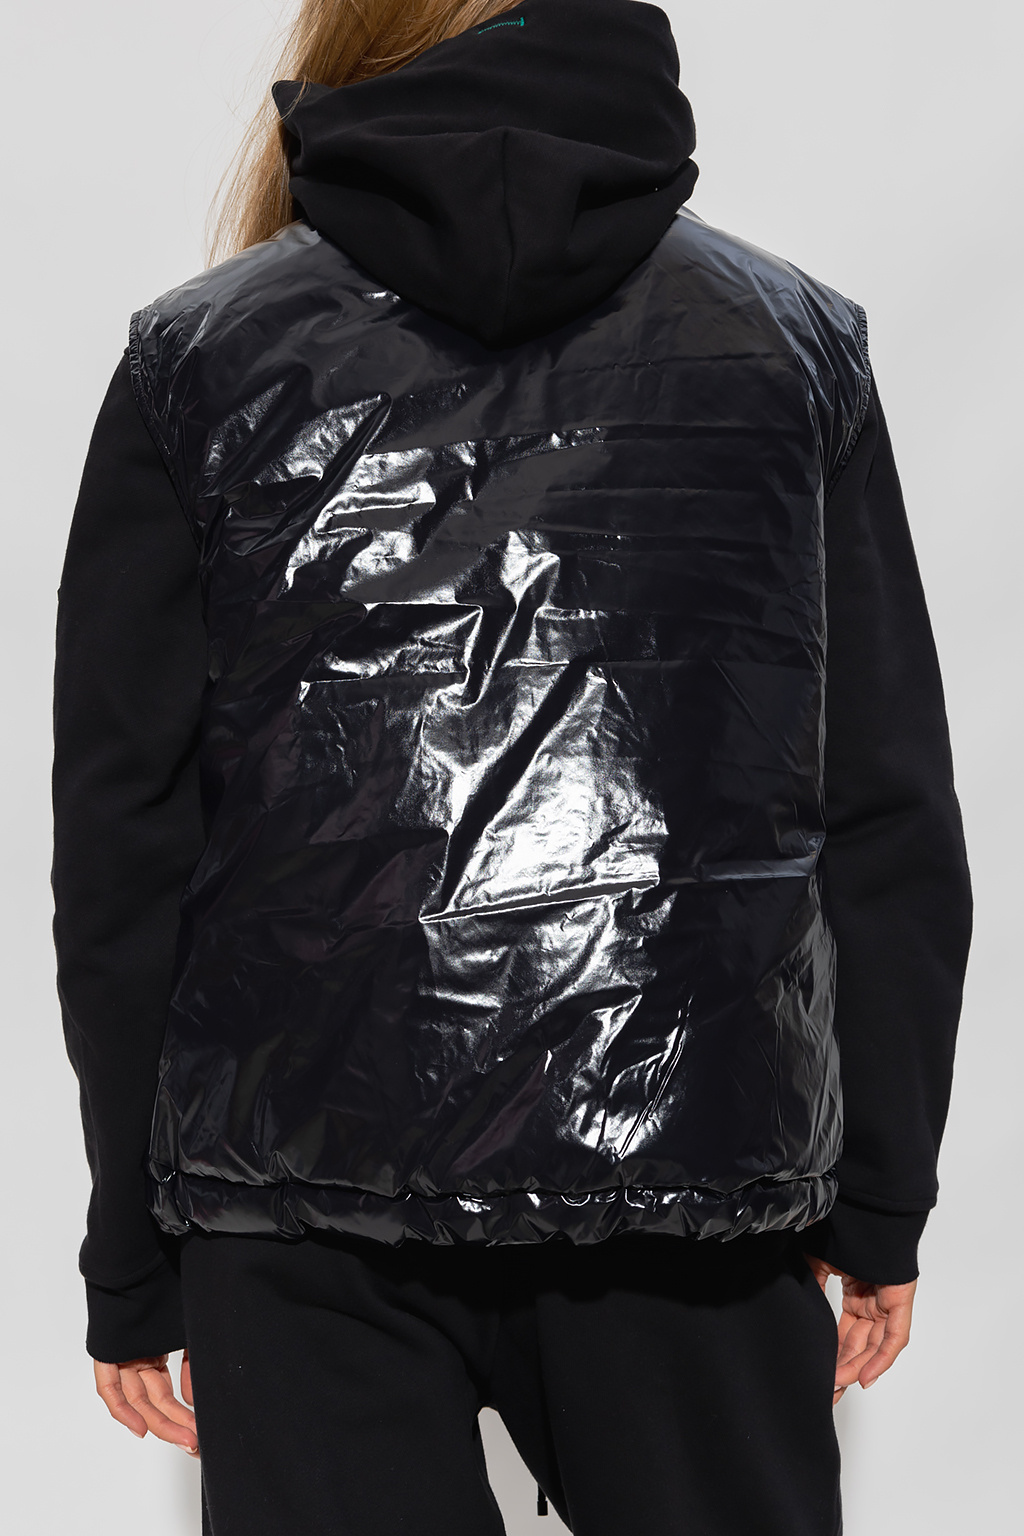 Moncler Genius 2 Outer and Inner layer